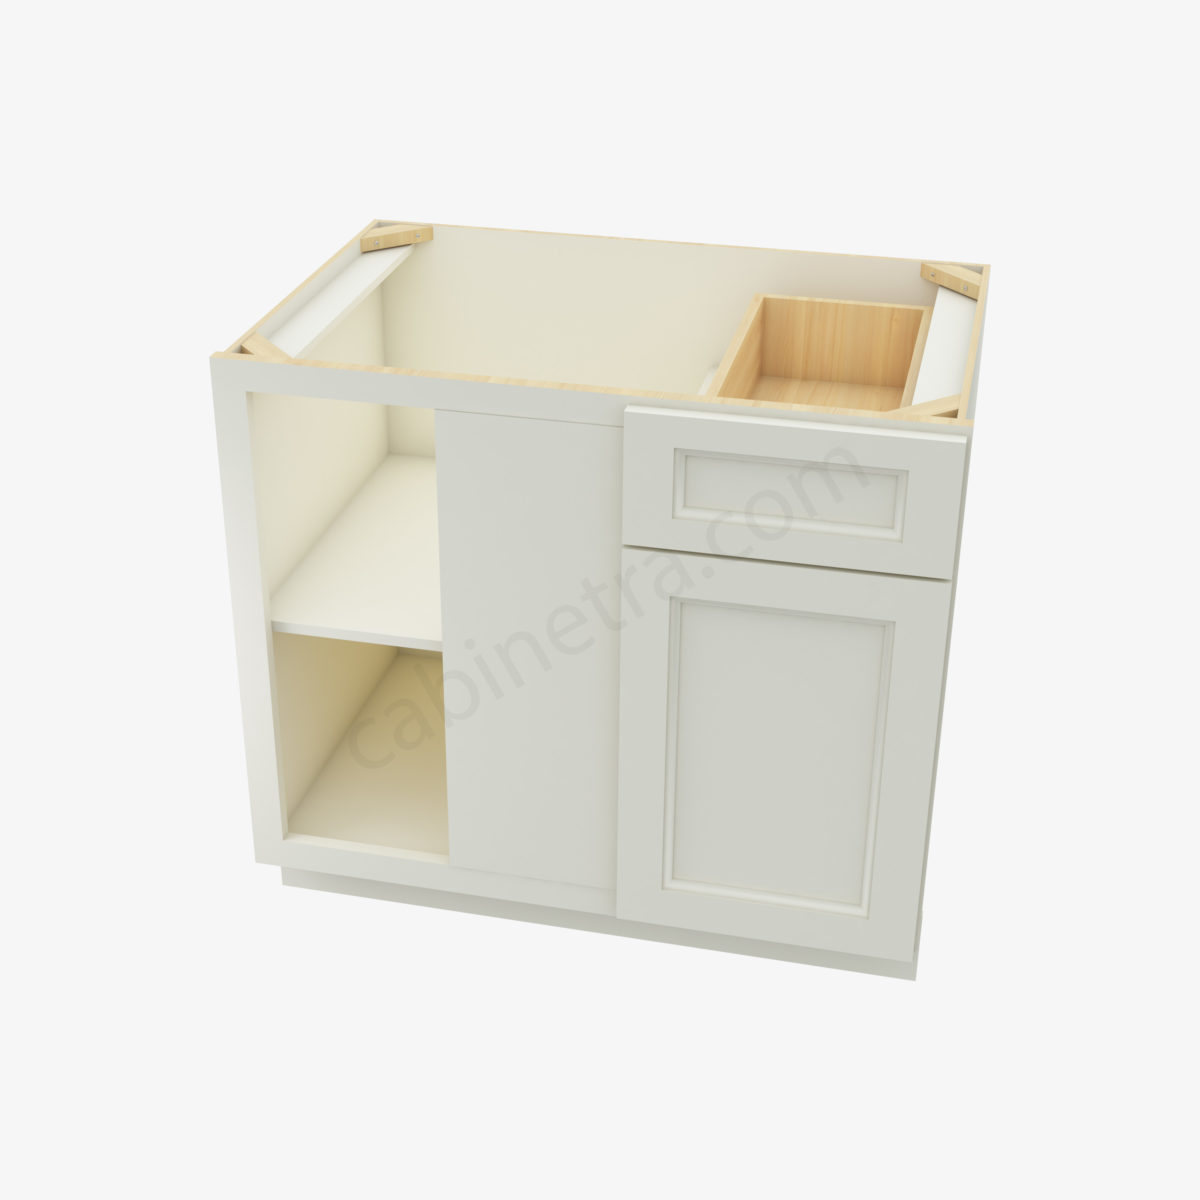 TQ BBLC39 42 36W 3 Forevermark Townplace Crema Cabinetra scaled